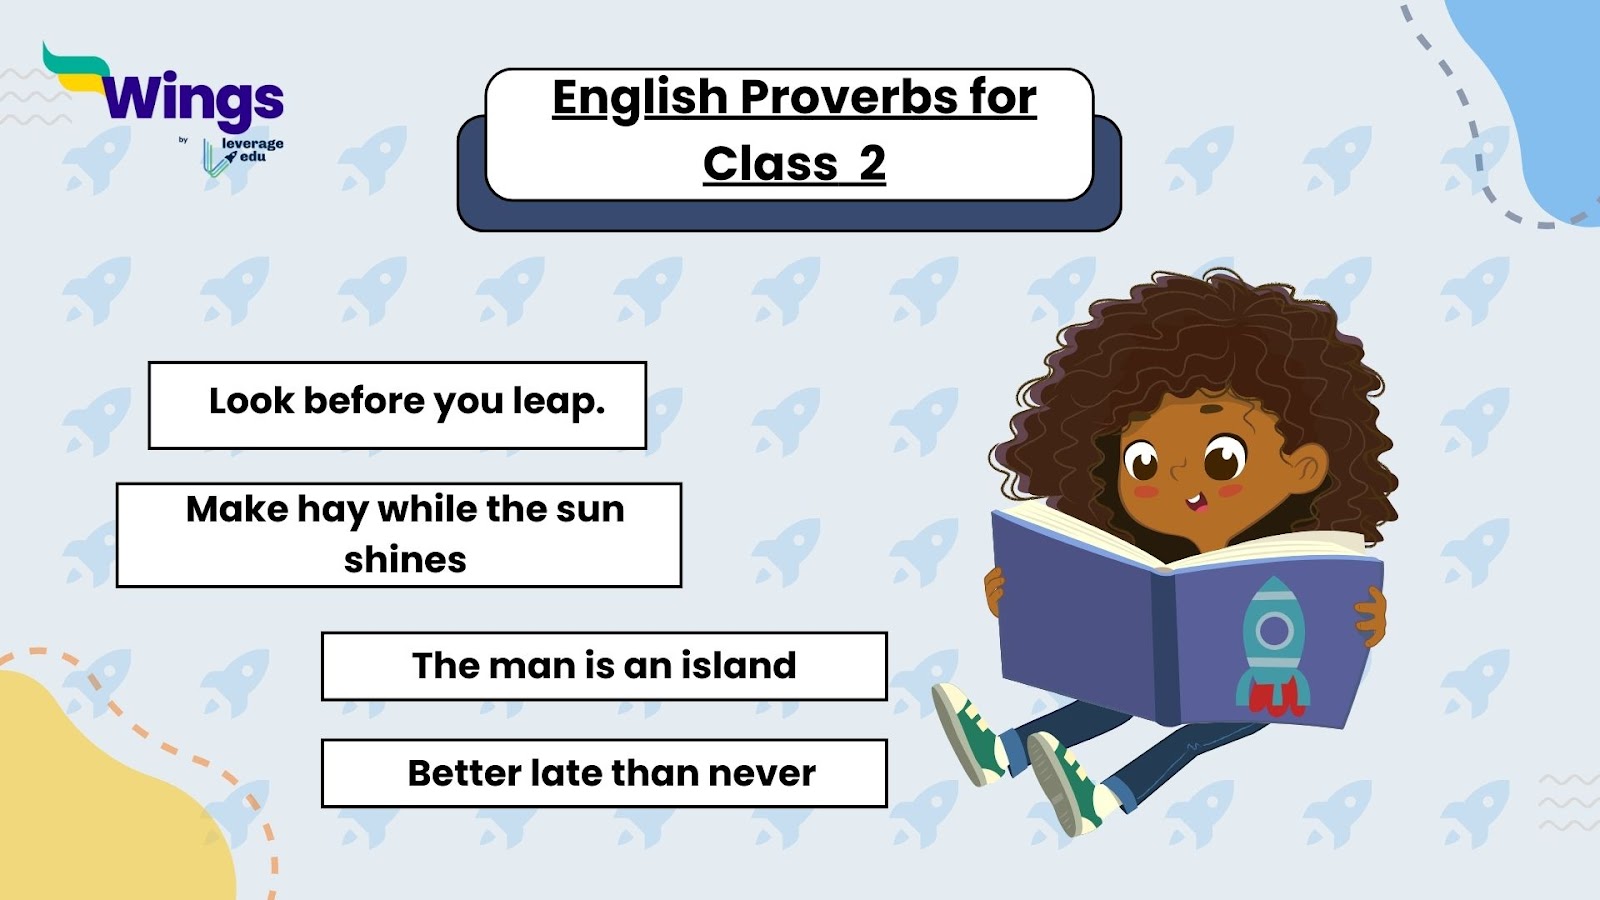 Common English Proverbs for Class 2 Students
